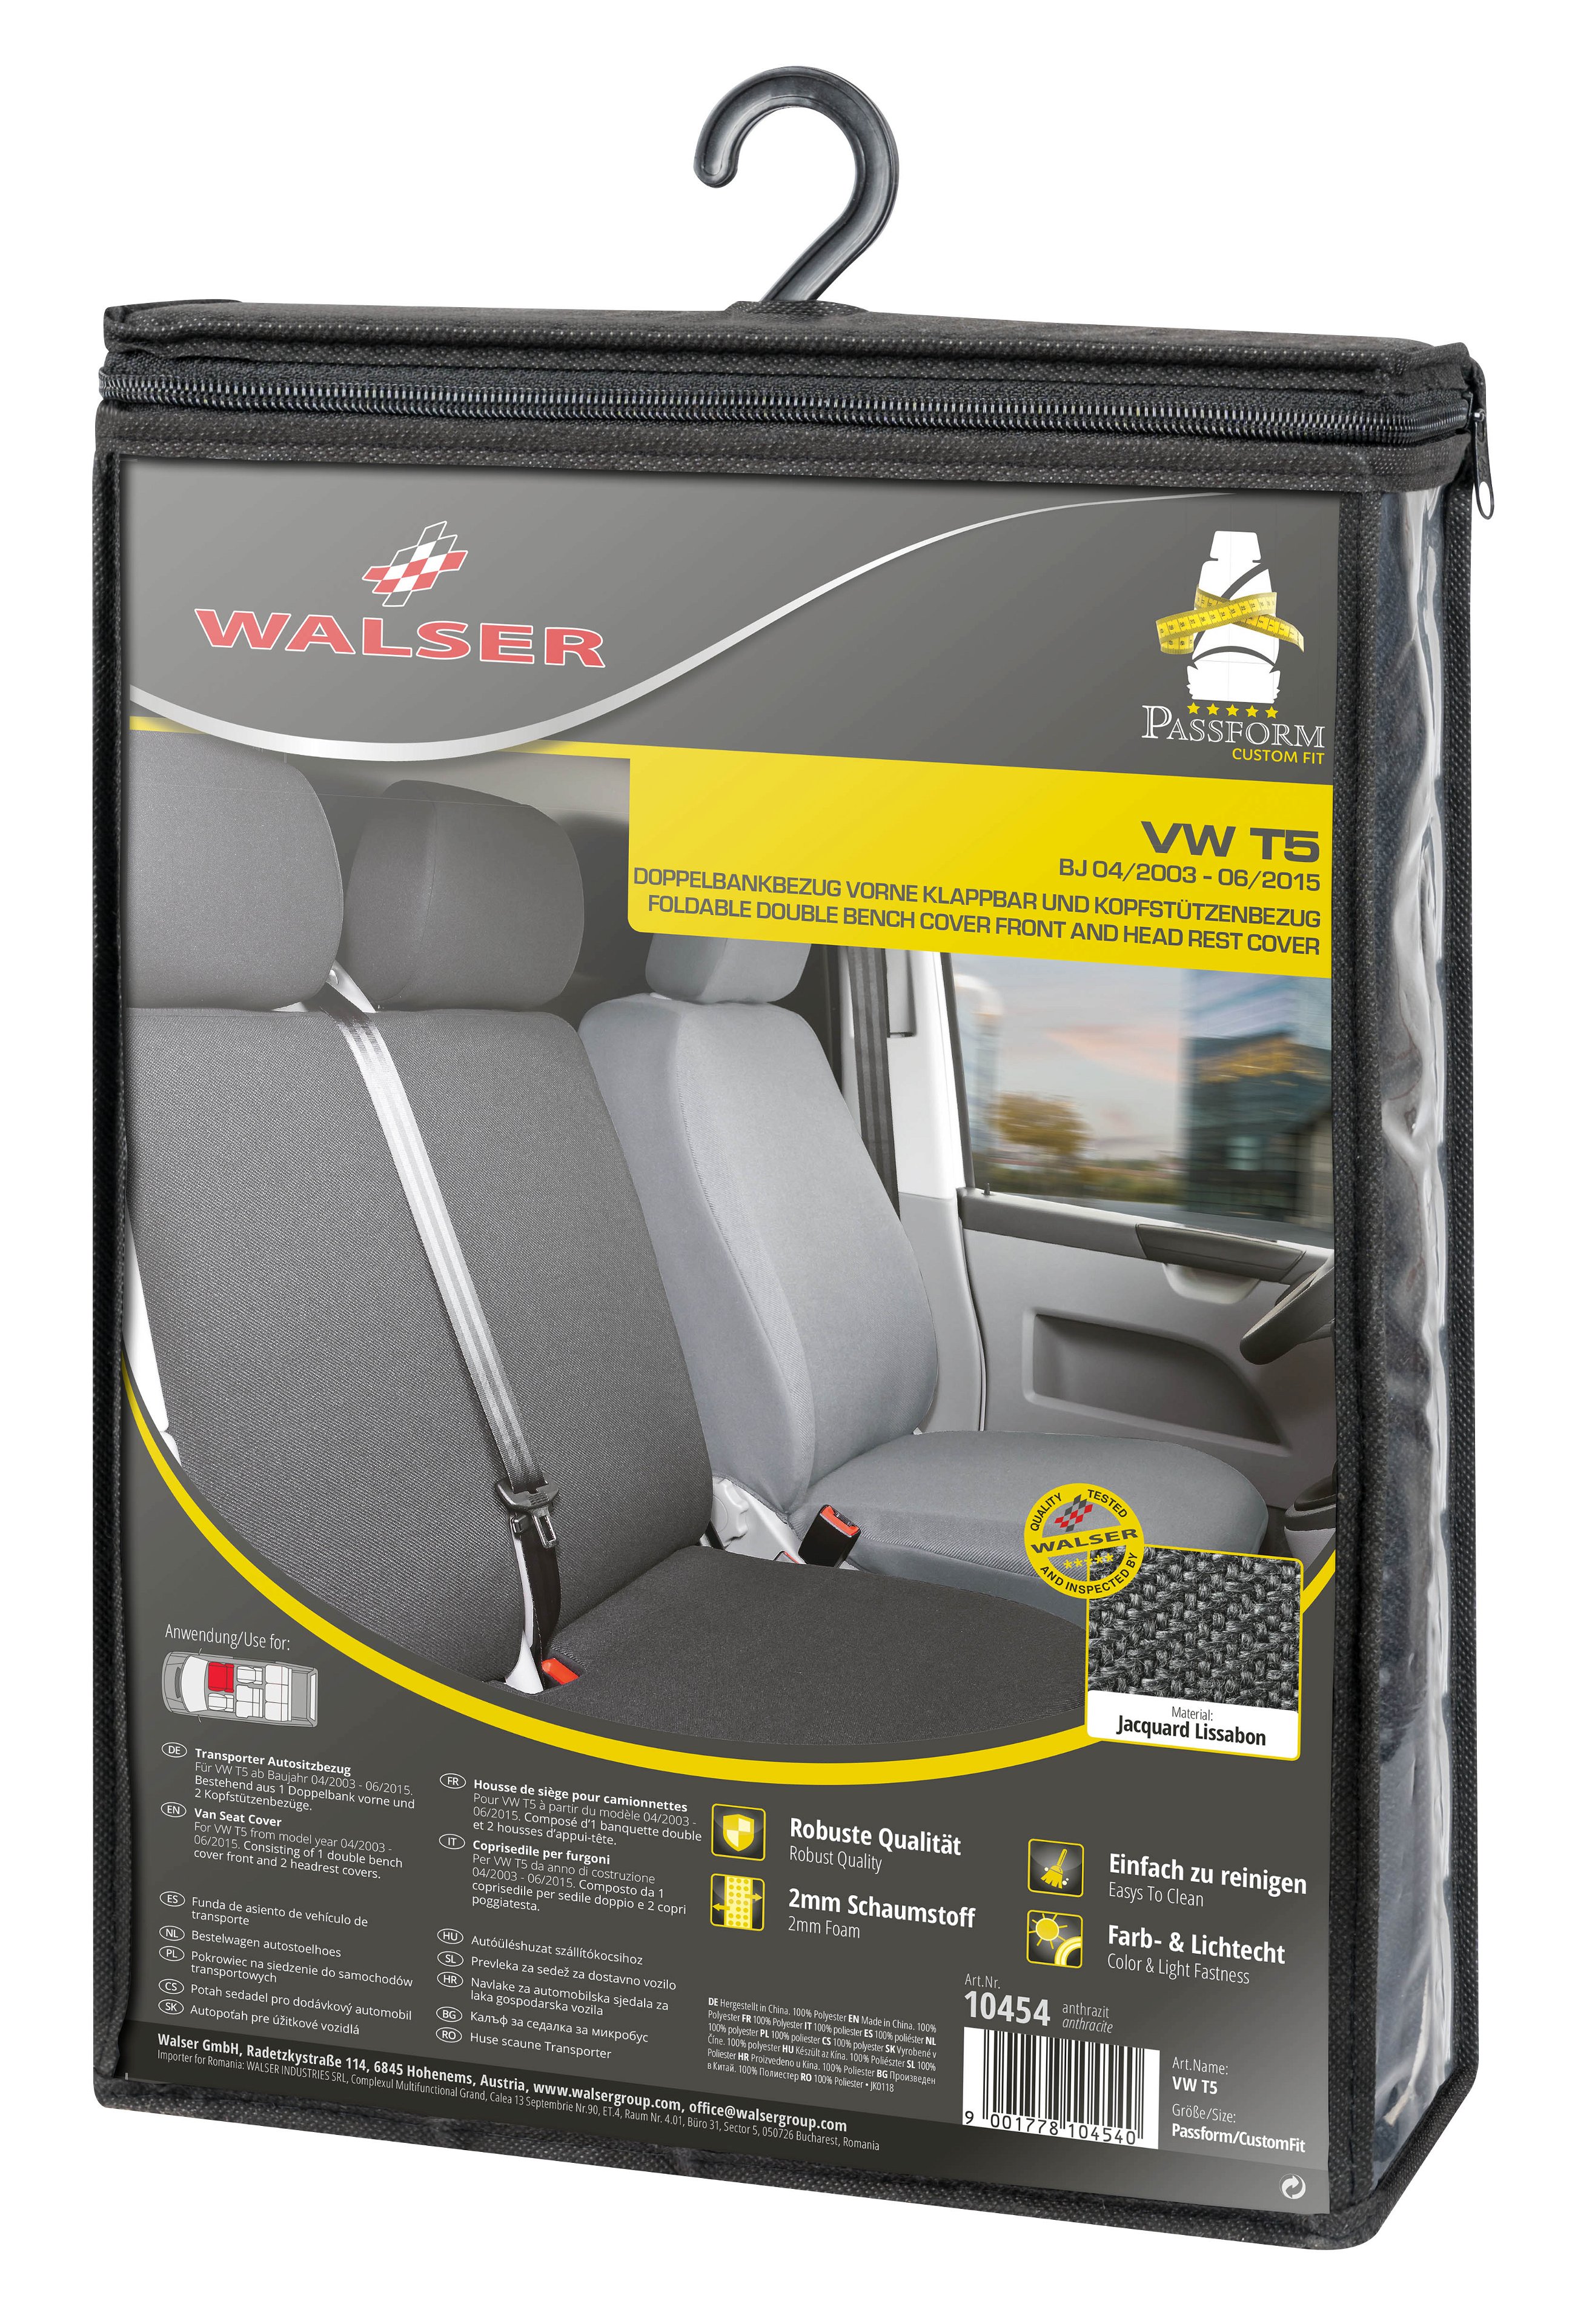 Car Seat cover Transporter made of fabric for VW T5, double bench foldable in front